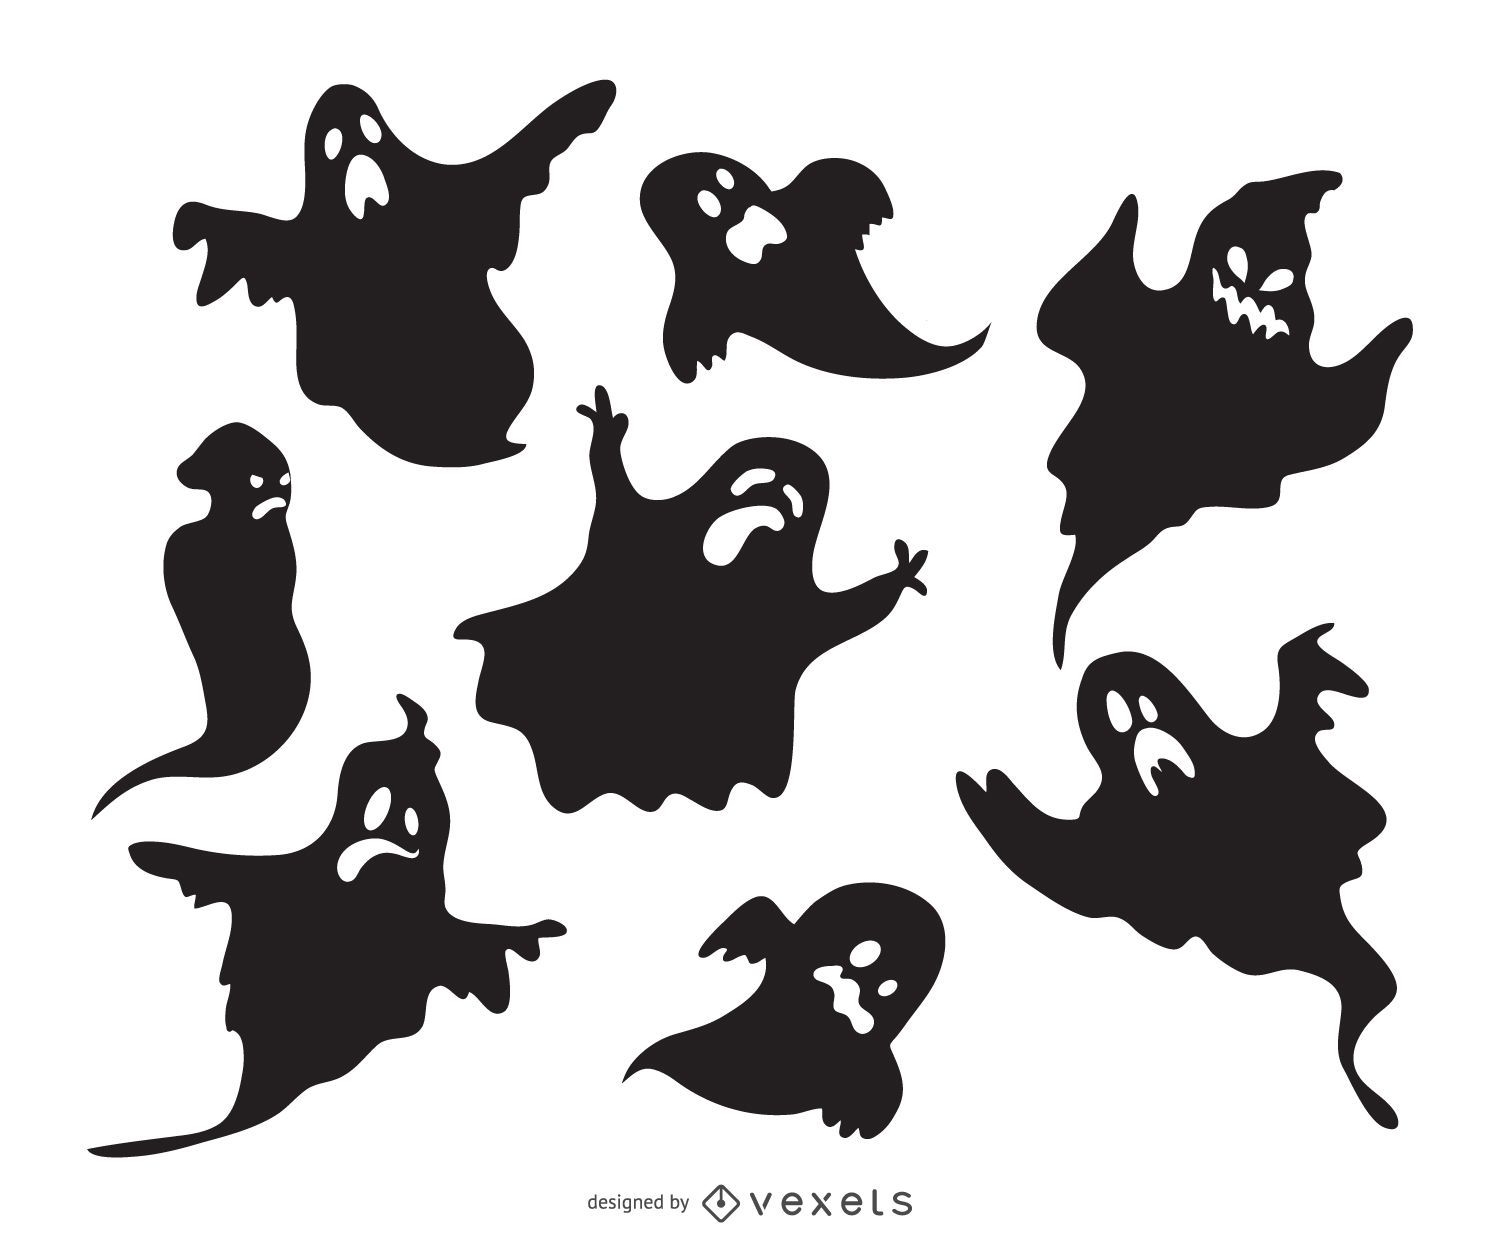 Spooky ghost silhouettes set